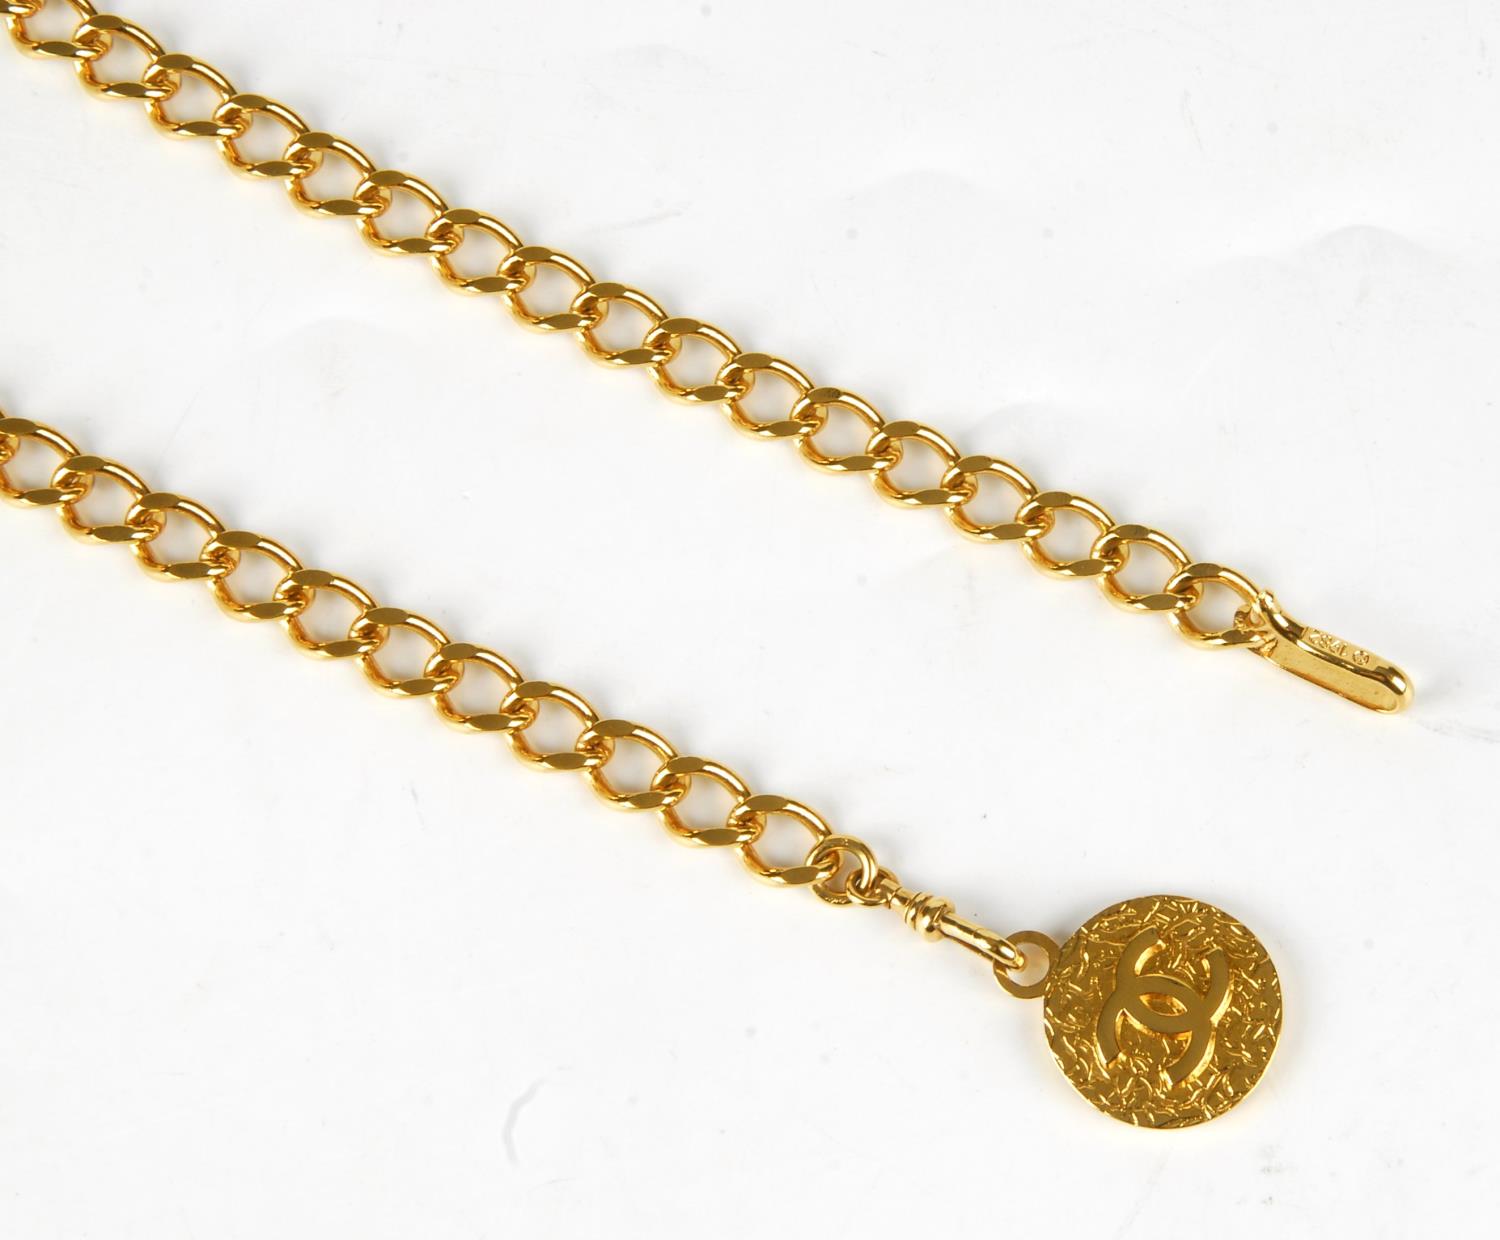 CHANEL - a chain belt. Featuring a gold-tone chain with a large logo CC medallion hanging at one end - Image 3 of 3